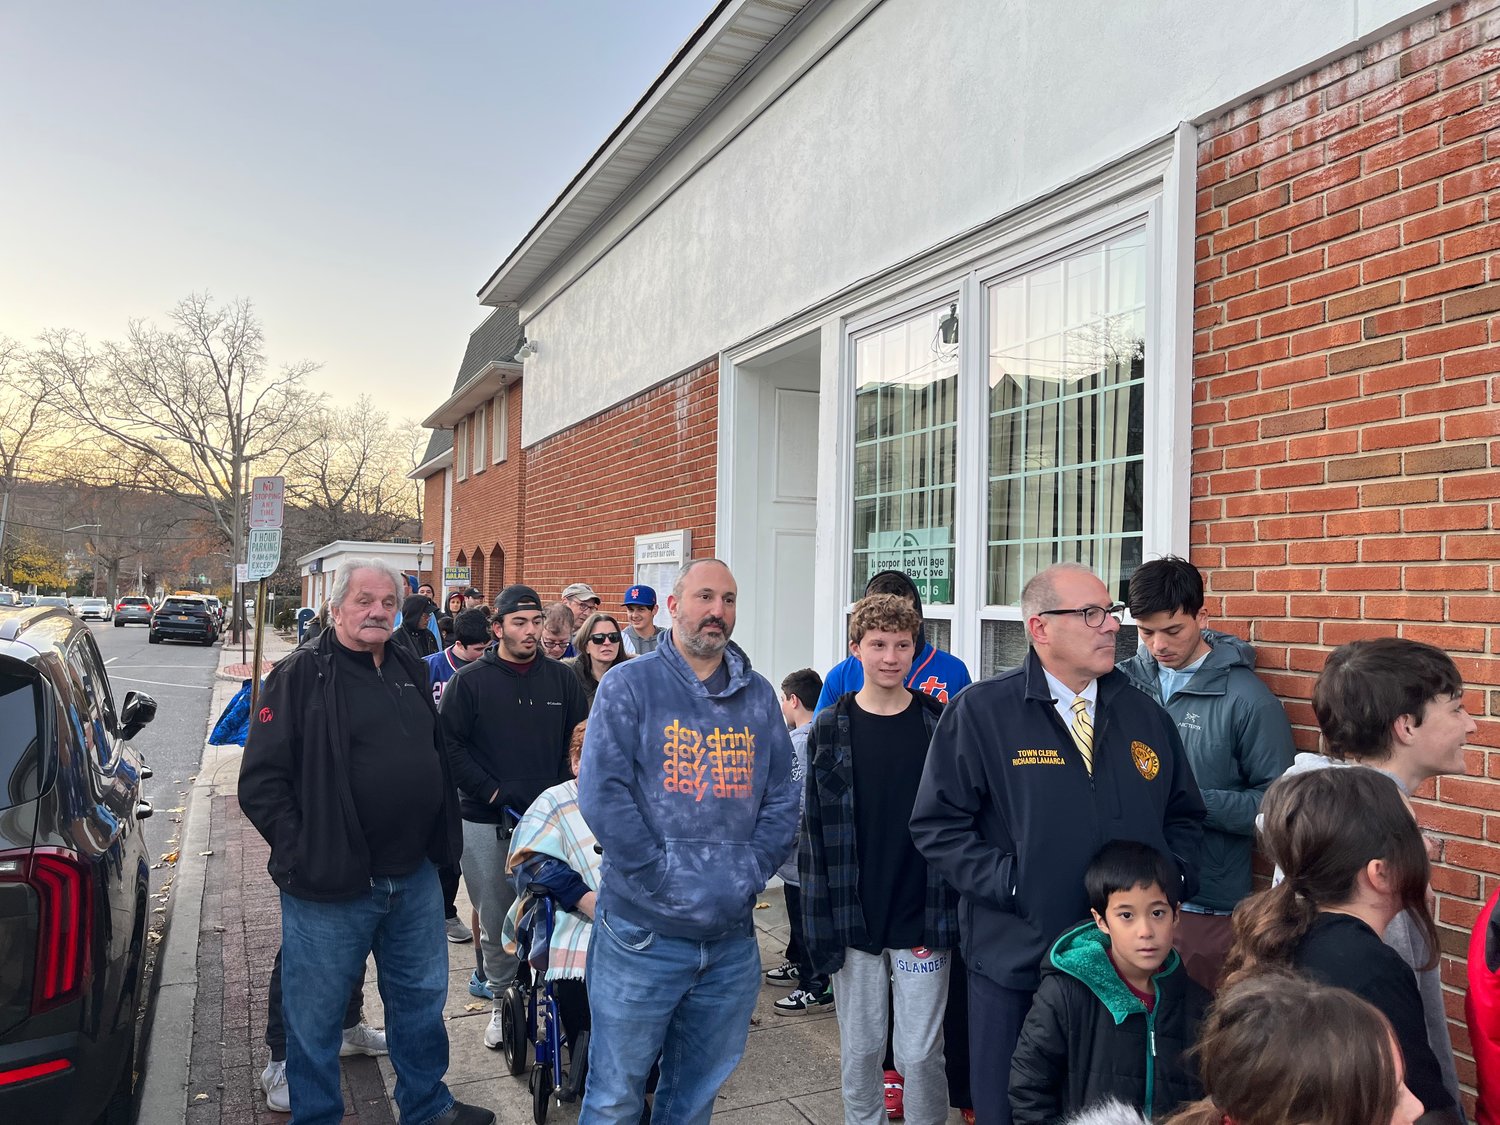 The line to meet New York Mets first baseman Daniel Vogelbach on Nov. 29 stretched all the way down West Main Street in the hamlet.